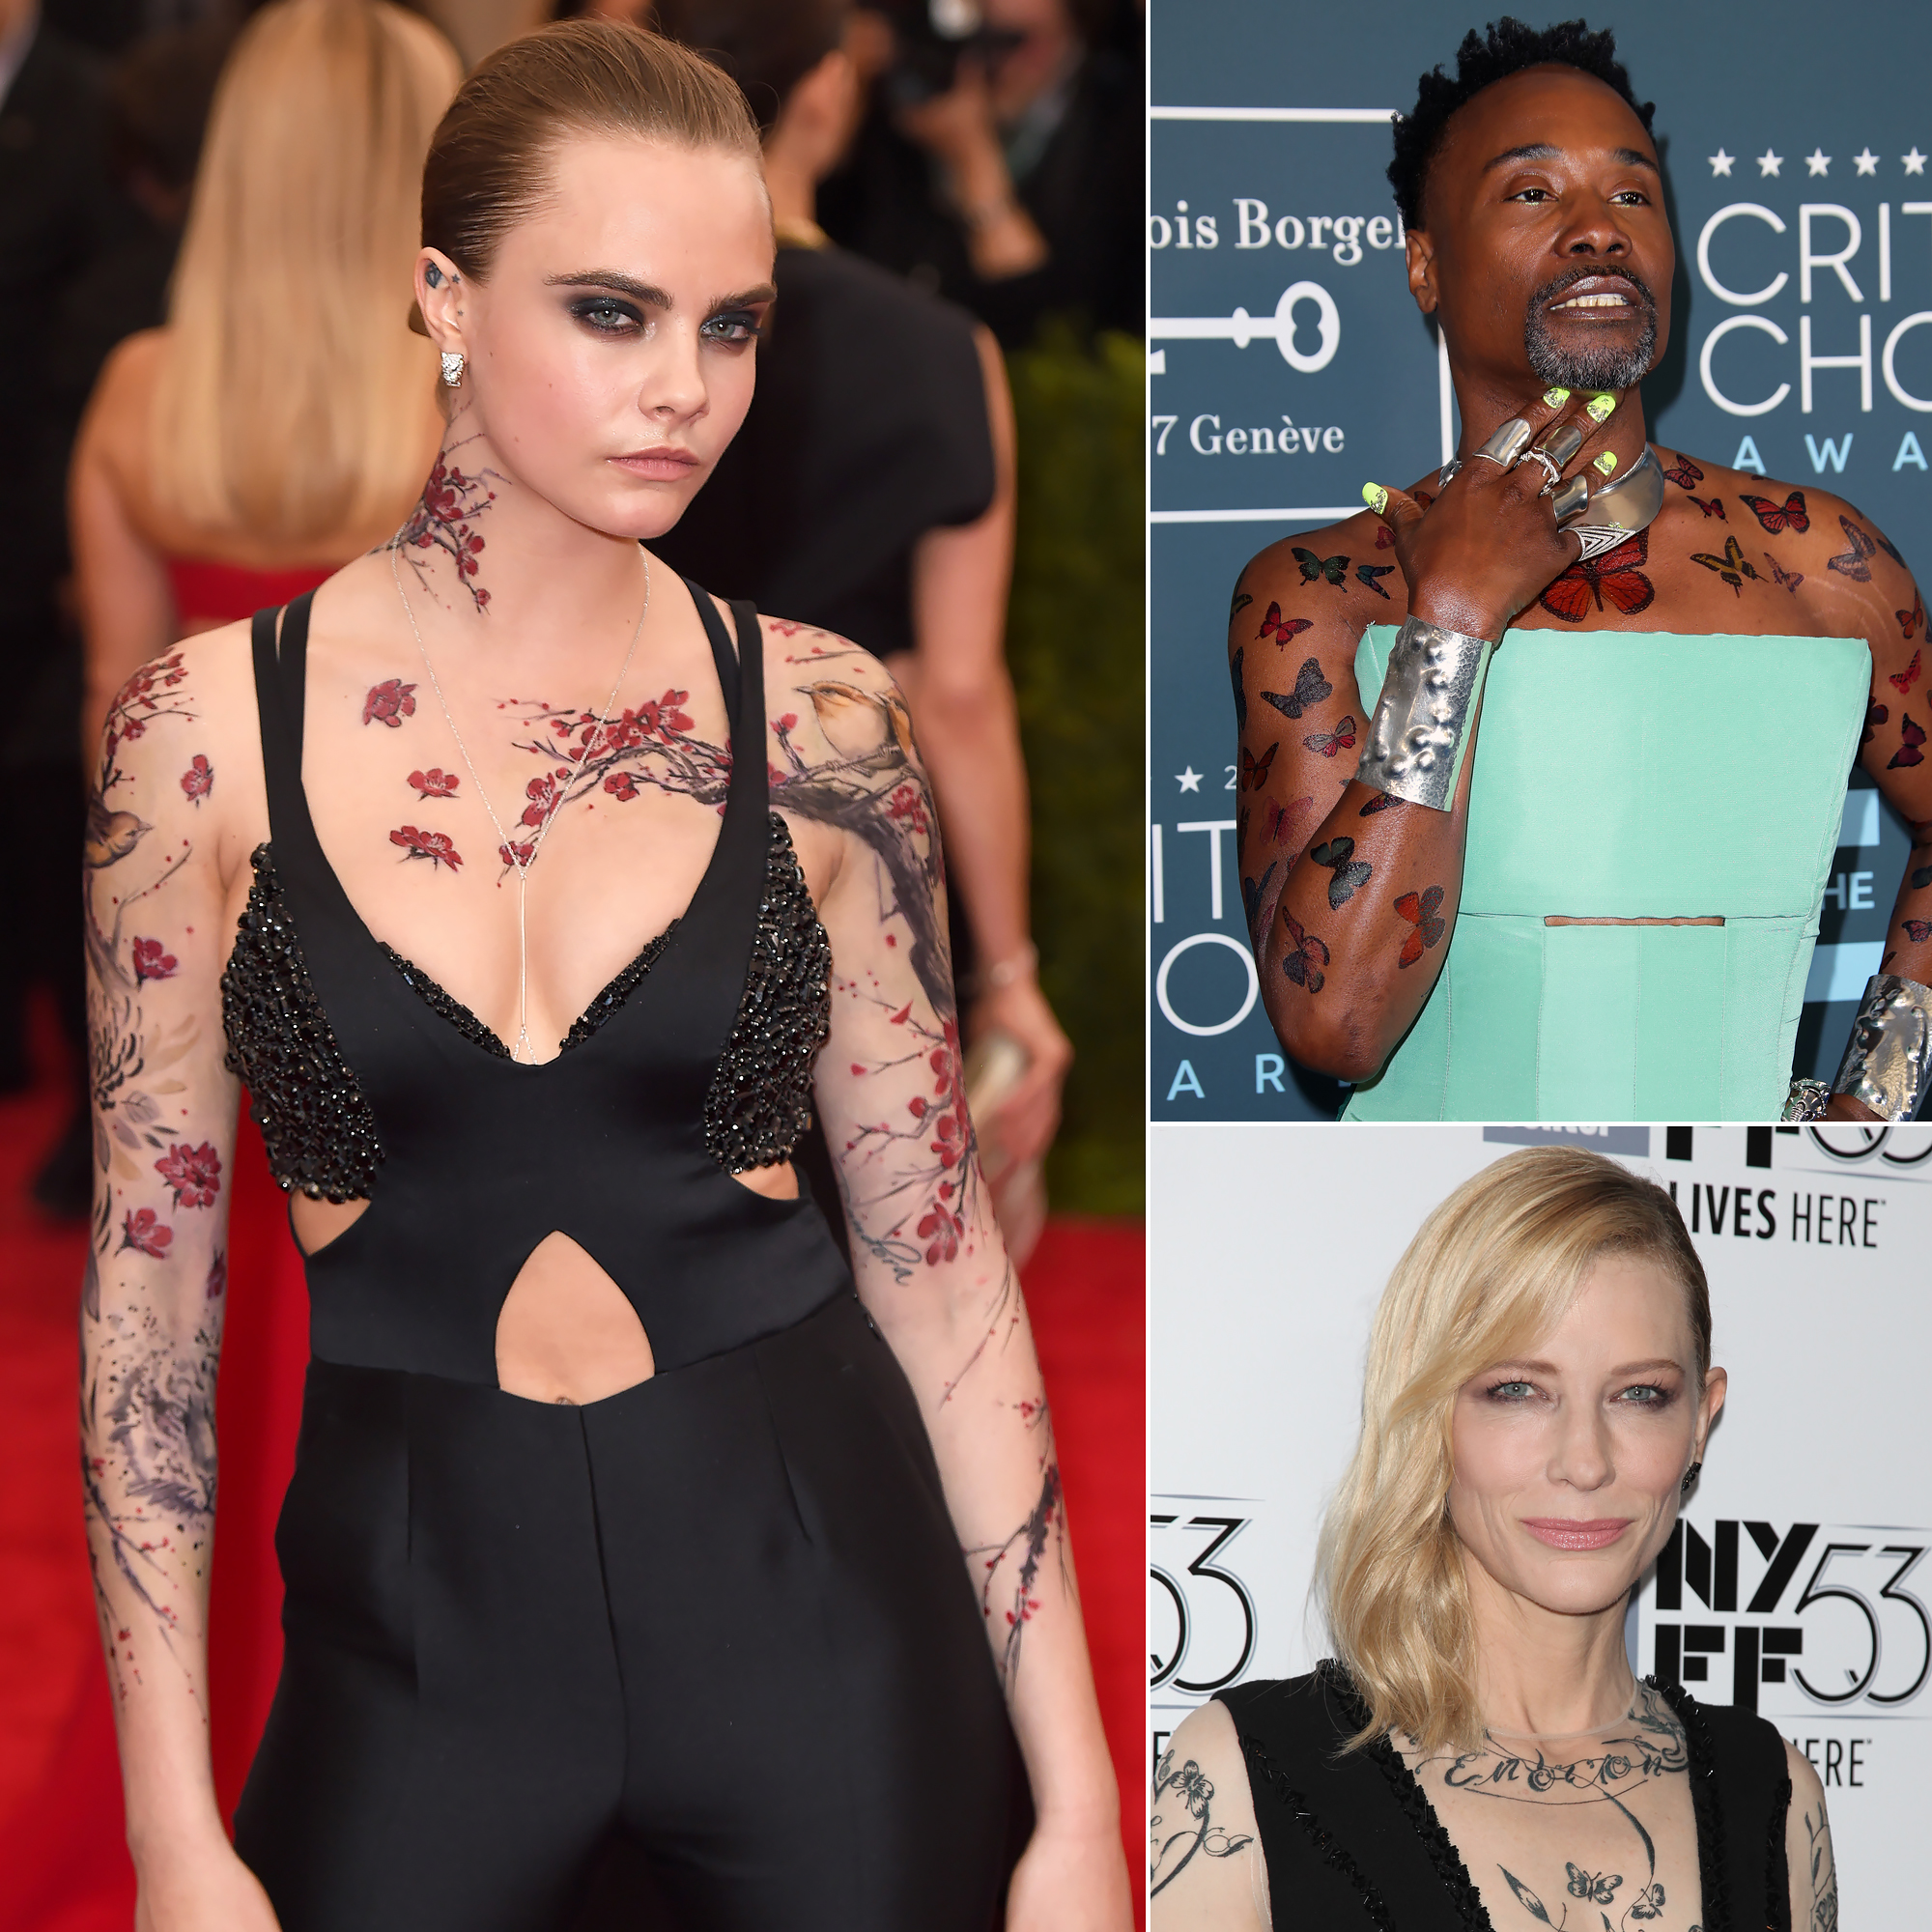 25 Awesome Celebrity Tattoos Female  SloDive  Celebrity tattoos women Celebrity  tattoos Back of neck tattoos for women